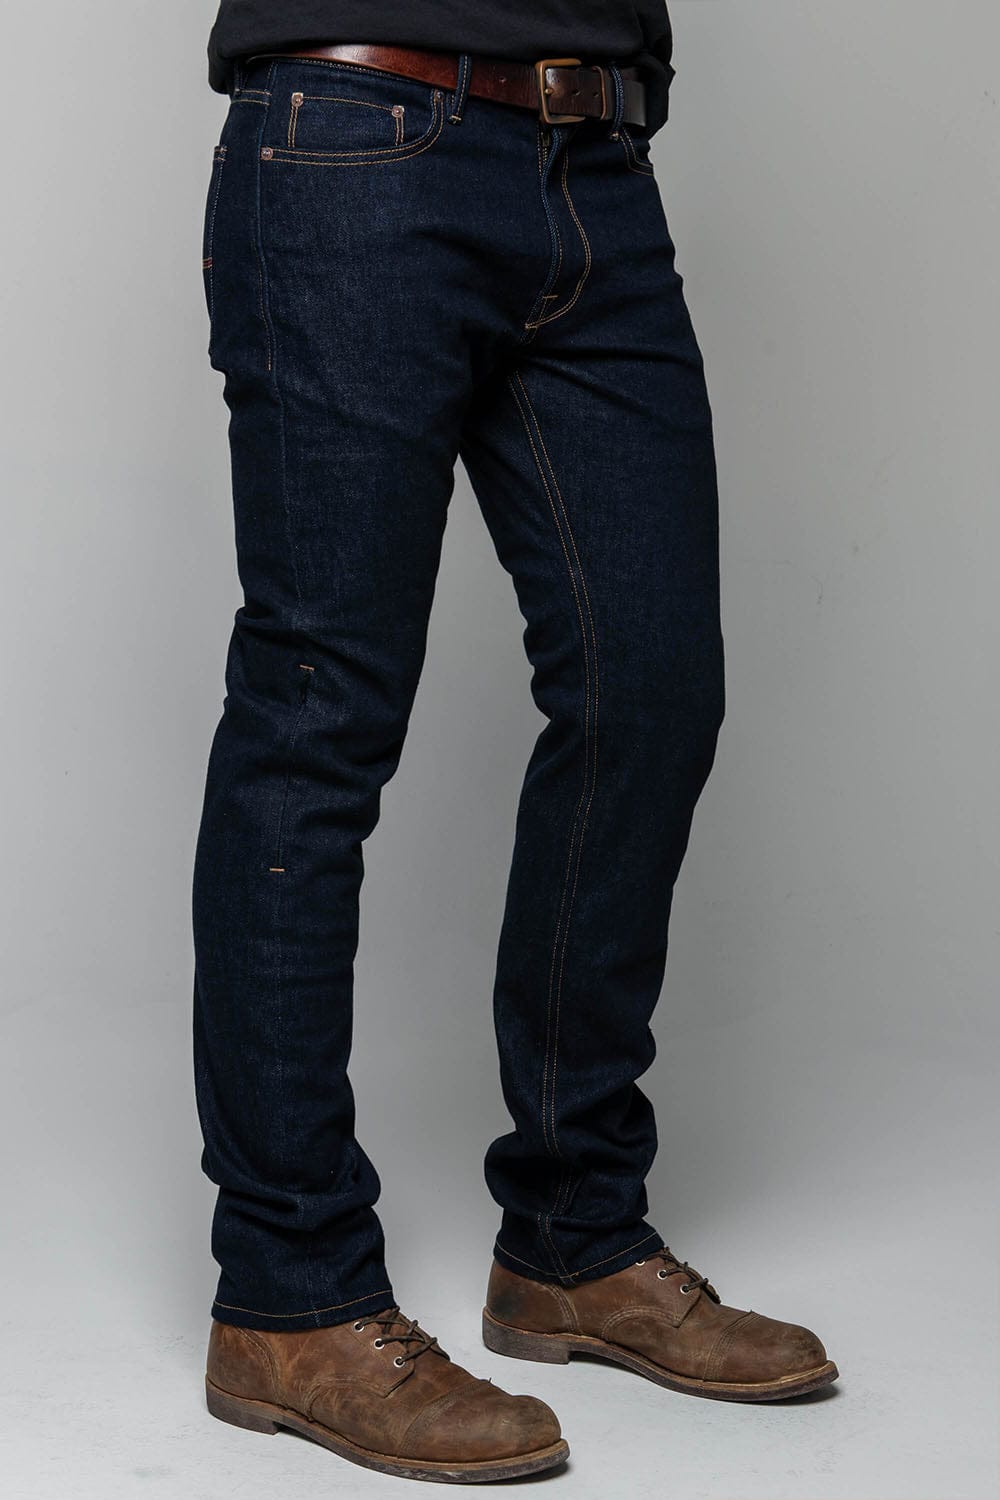 Ironsides Indigo Armored Denim Jeans. Features Protective DuPont ...